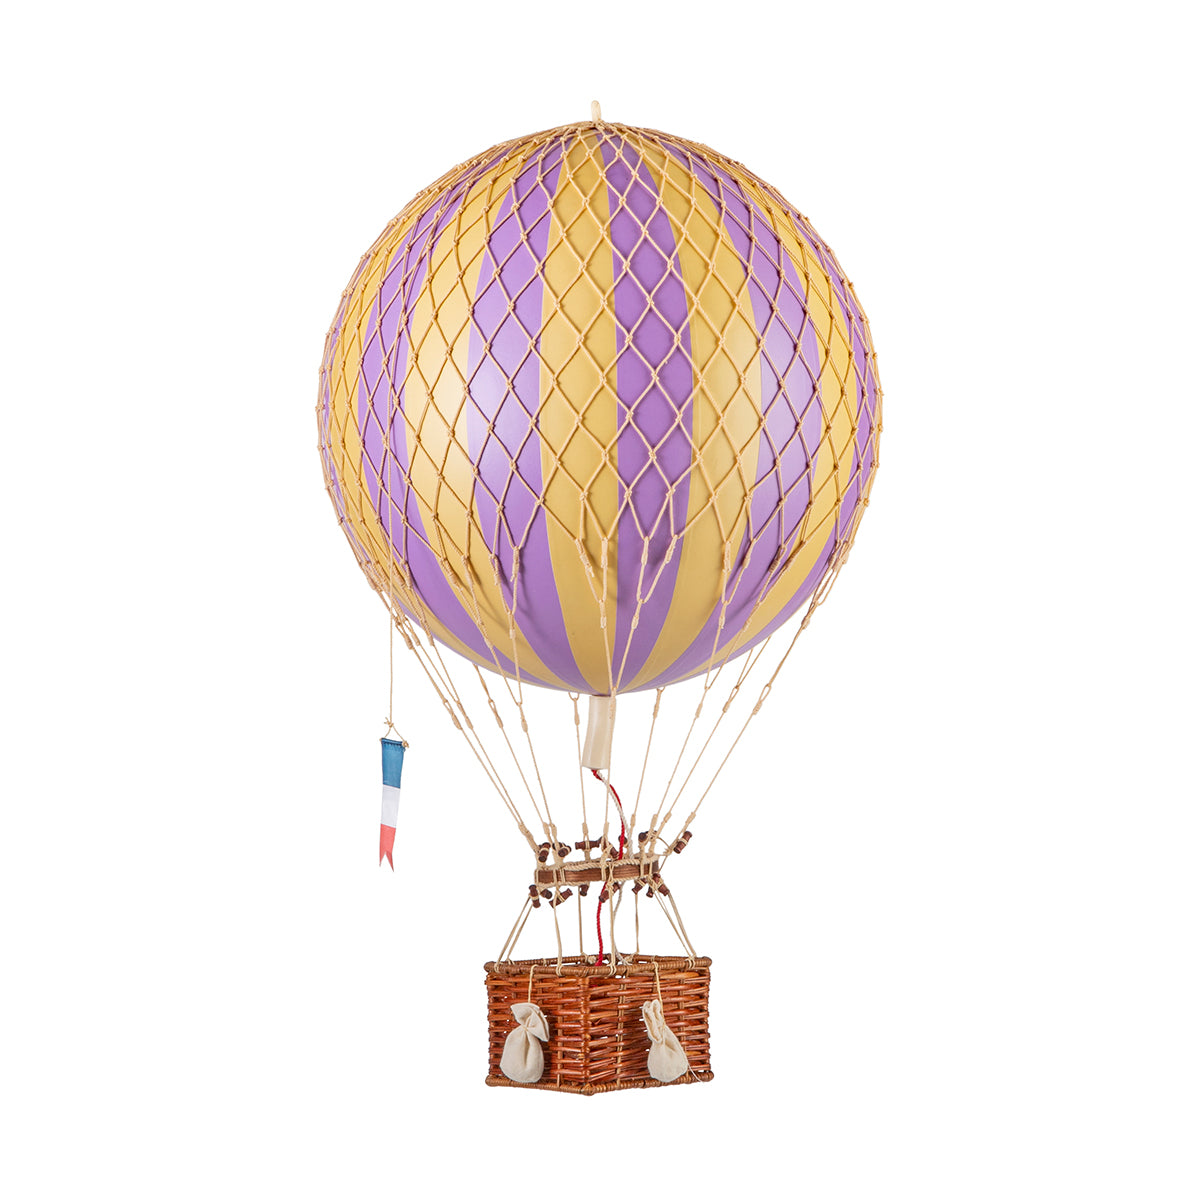 Experience the exhilarating adventure of soaring to new heights and gaining a unique perspective with our incredible Wonderen Medium Hot Air Balloon - Royal Aero, complete with a charming basket.